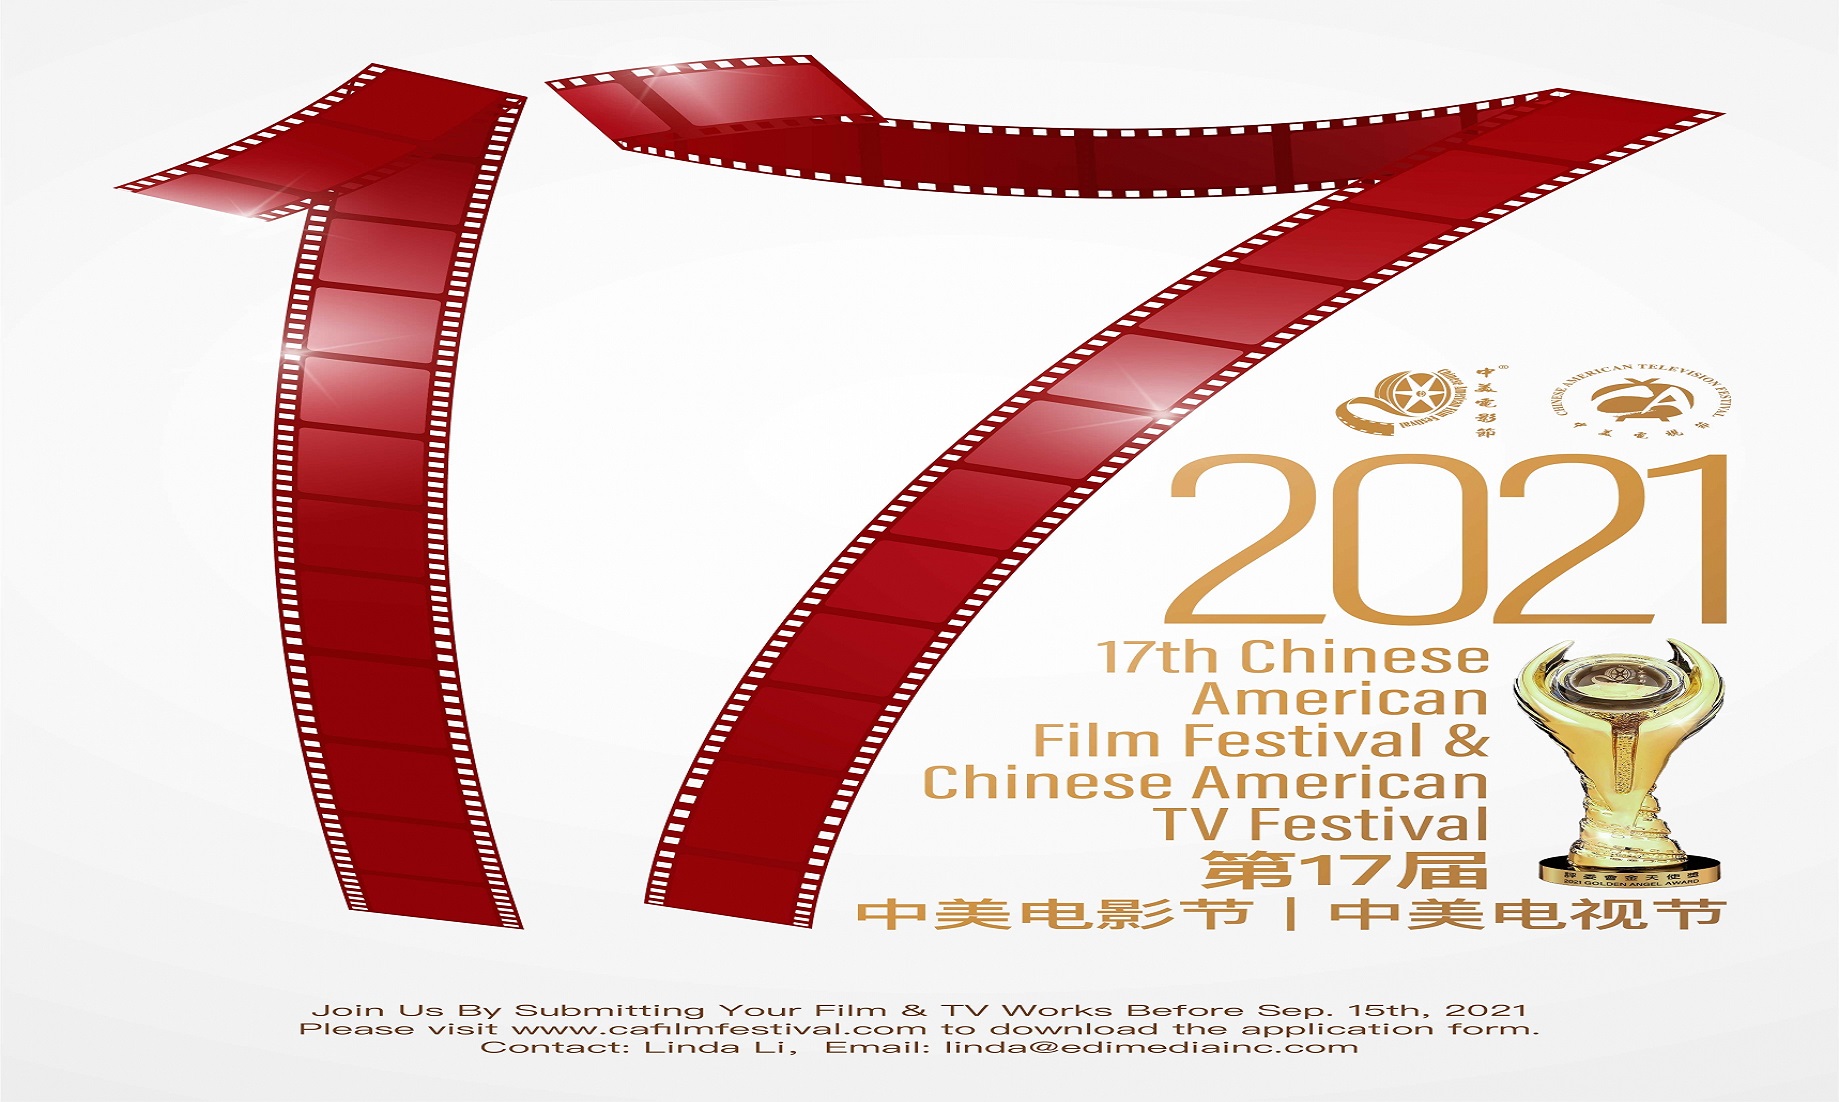 Chinese American Film And TV Festival To Return Live, In-Person To Los Angeles Next Month